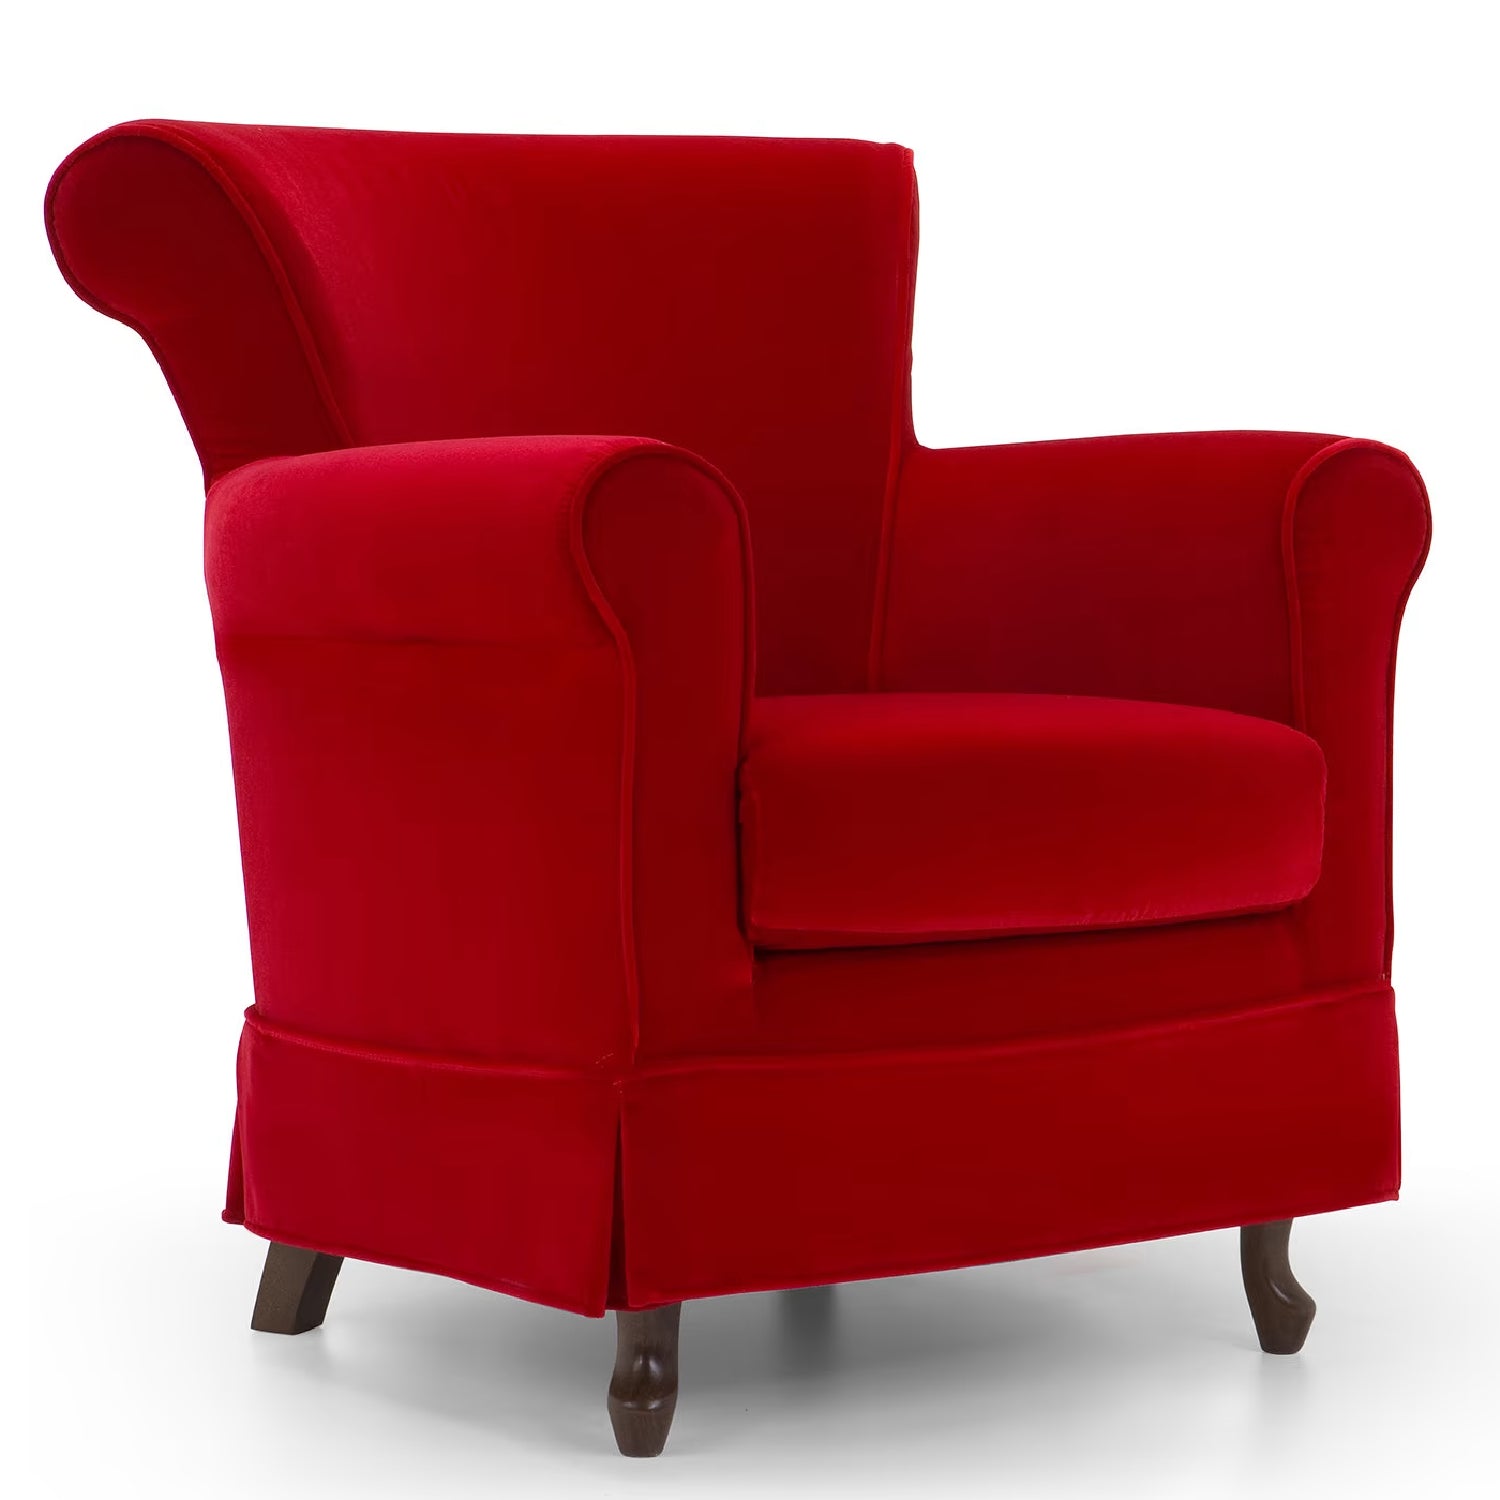 070 Traditional Red Armchair by Domingo Salotti